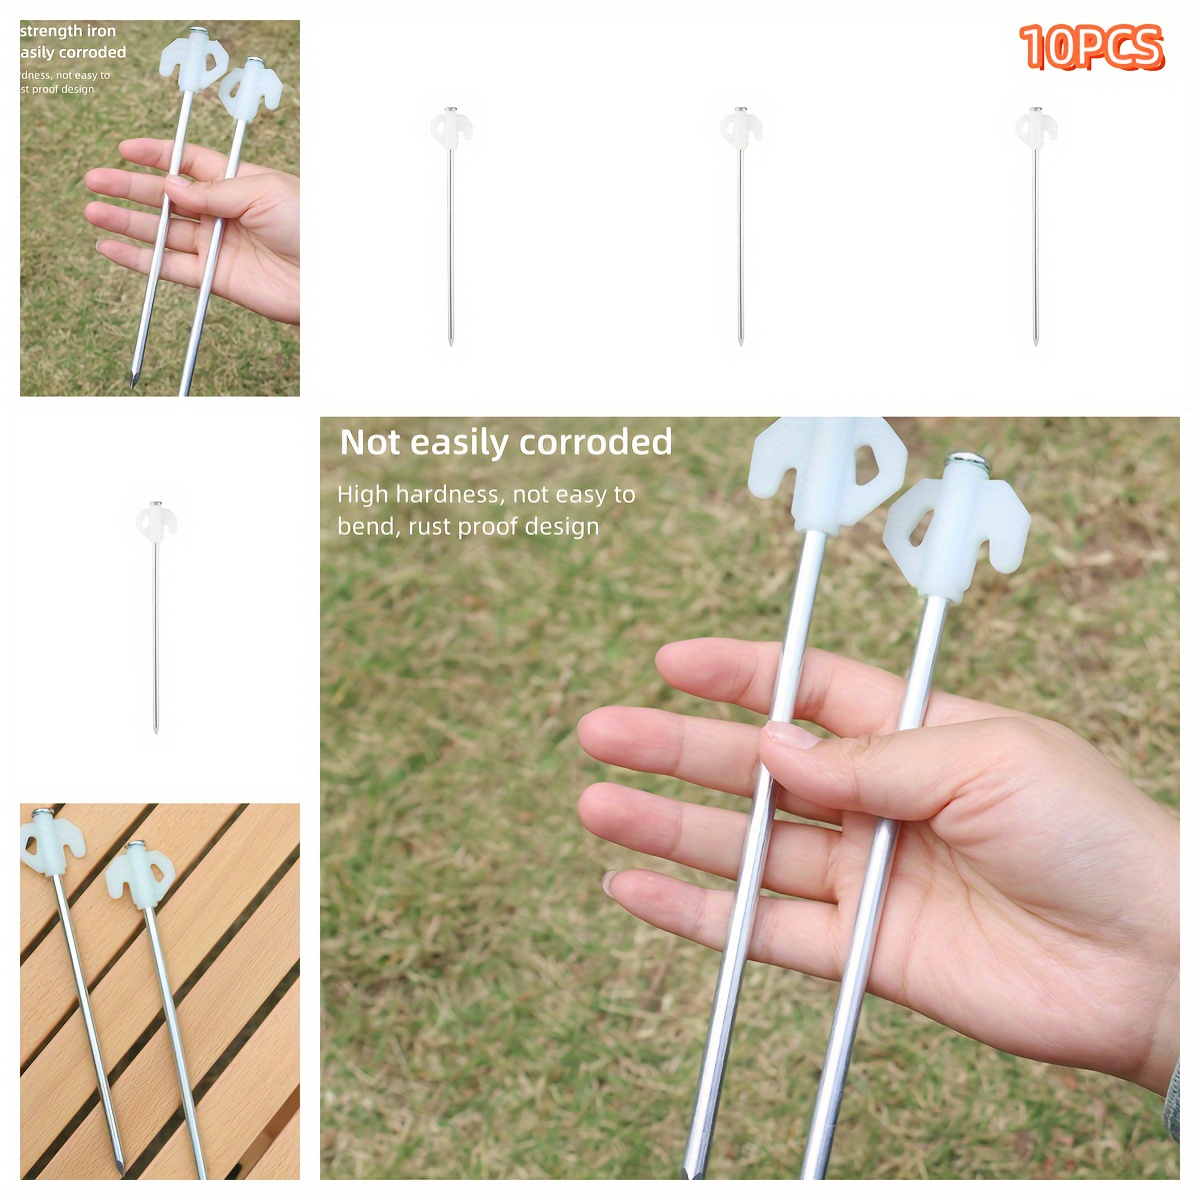 

10-pack Glow-in-the-dark Tent Stakes, Reinforced Windproof Camping Tent Pegs, Fluorescent Outdoor Canopy Ground Nails